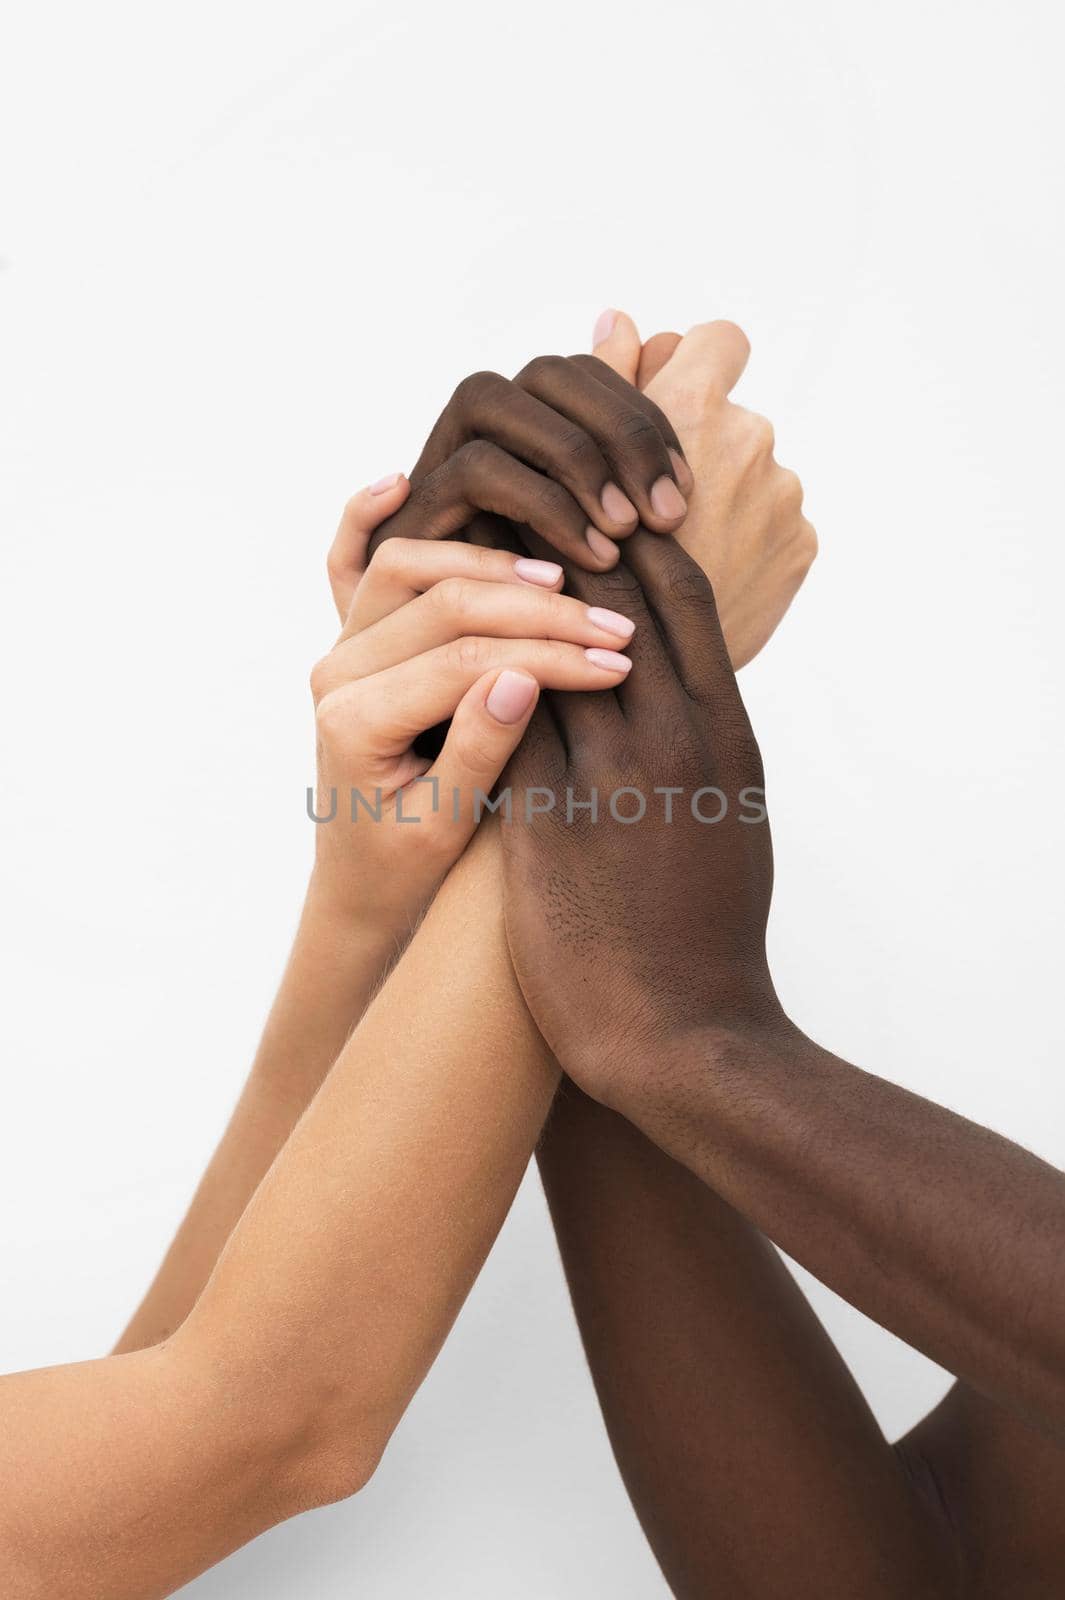 multiracial hands coming together 3. High quality beautiful photo concept by Zahard